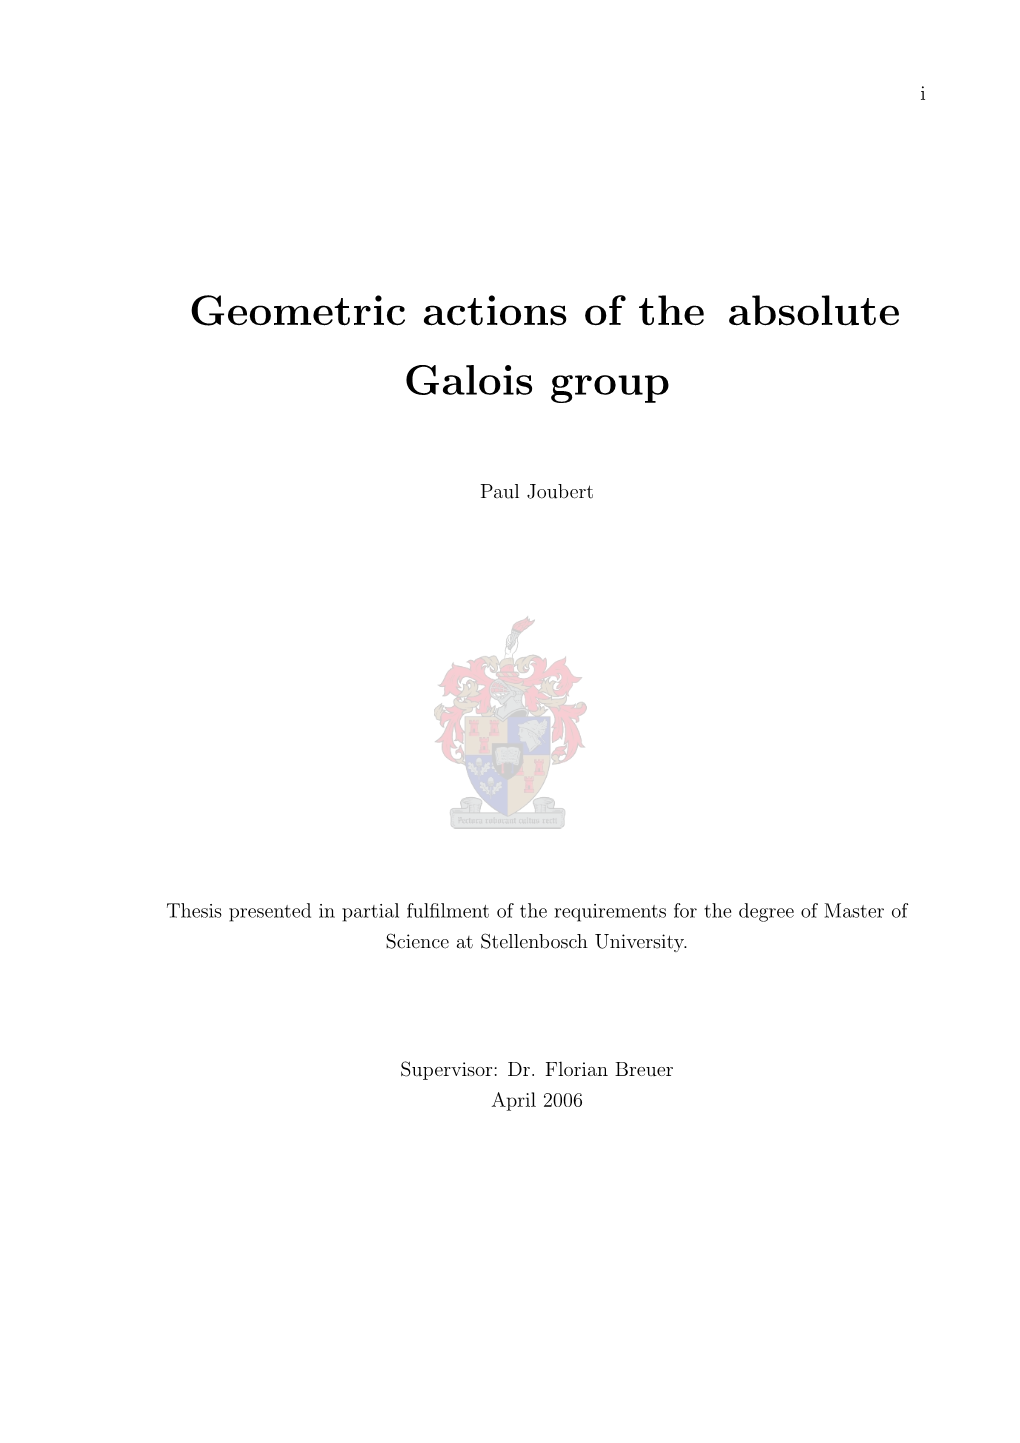 Geometric Actions of the Absolute Galois Group